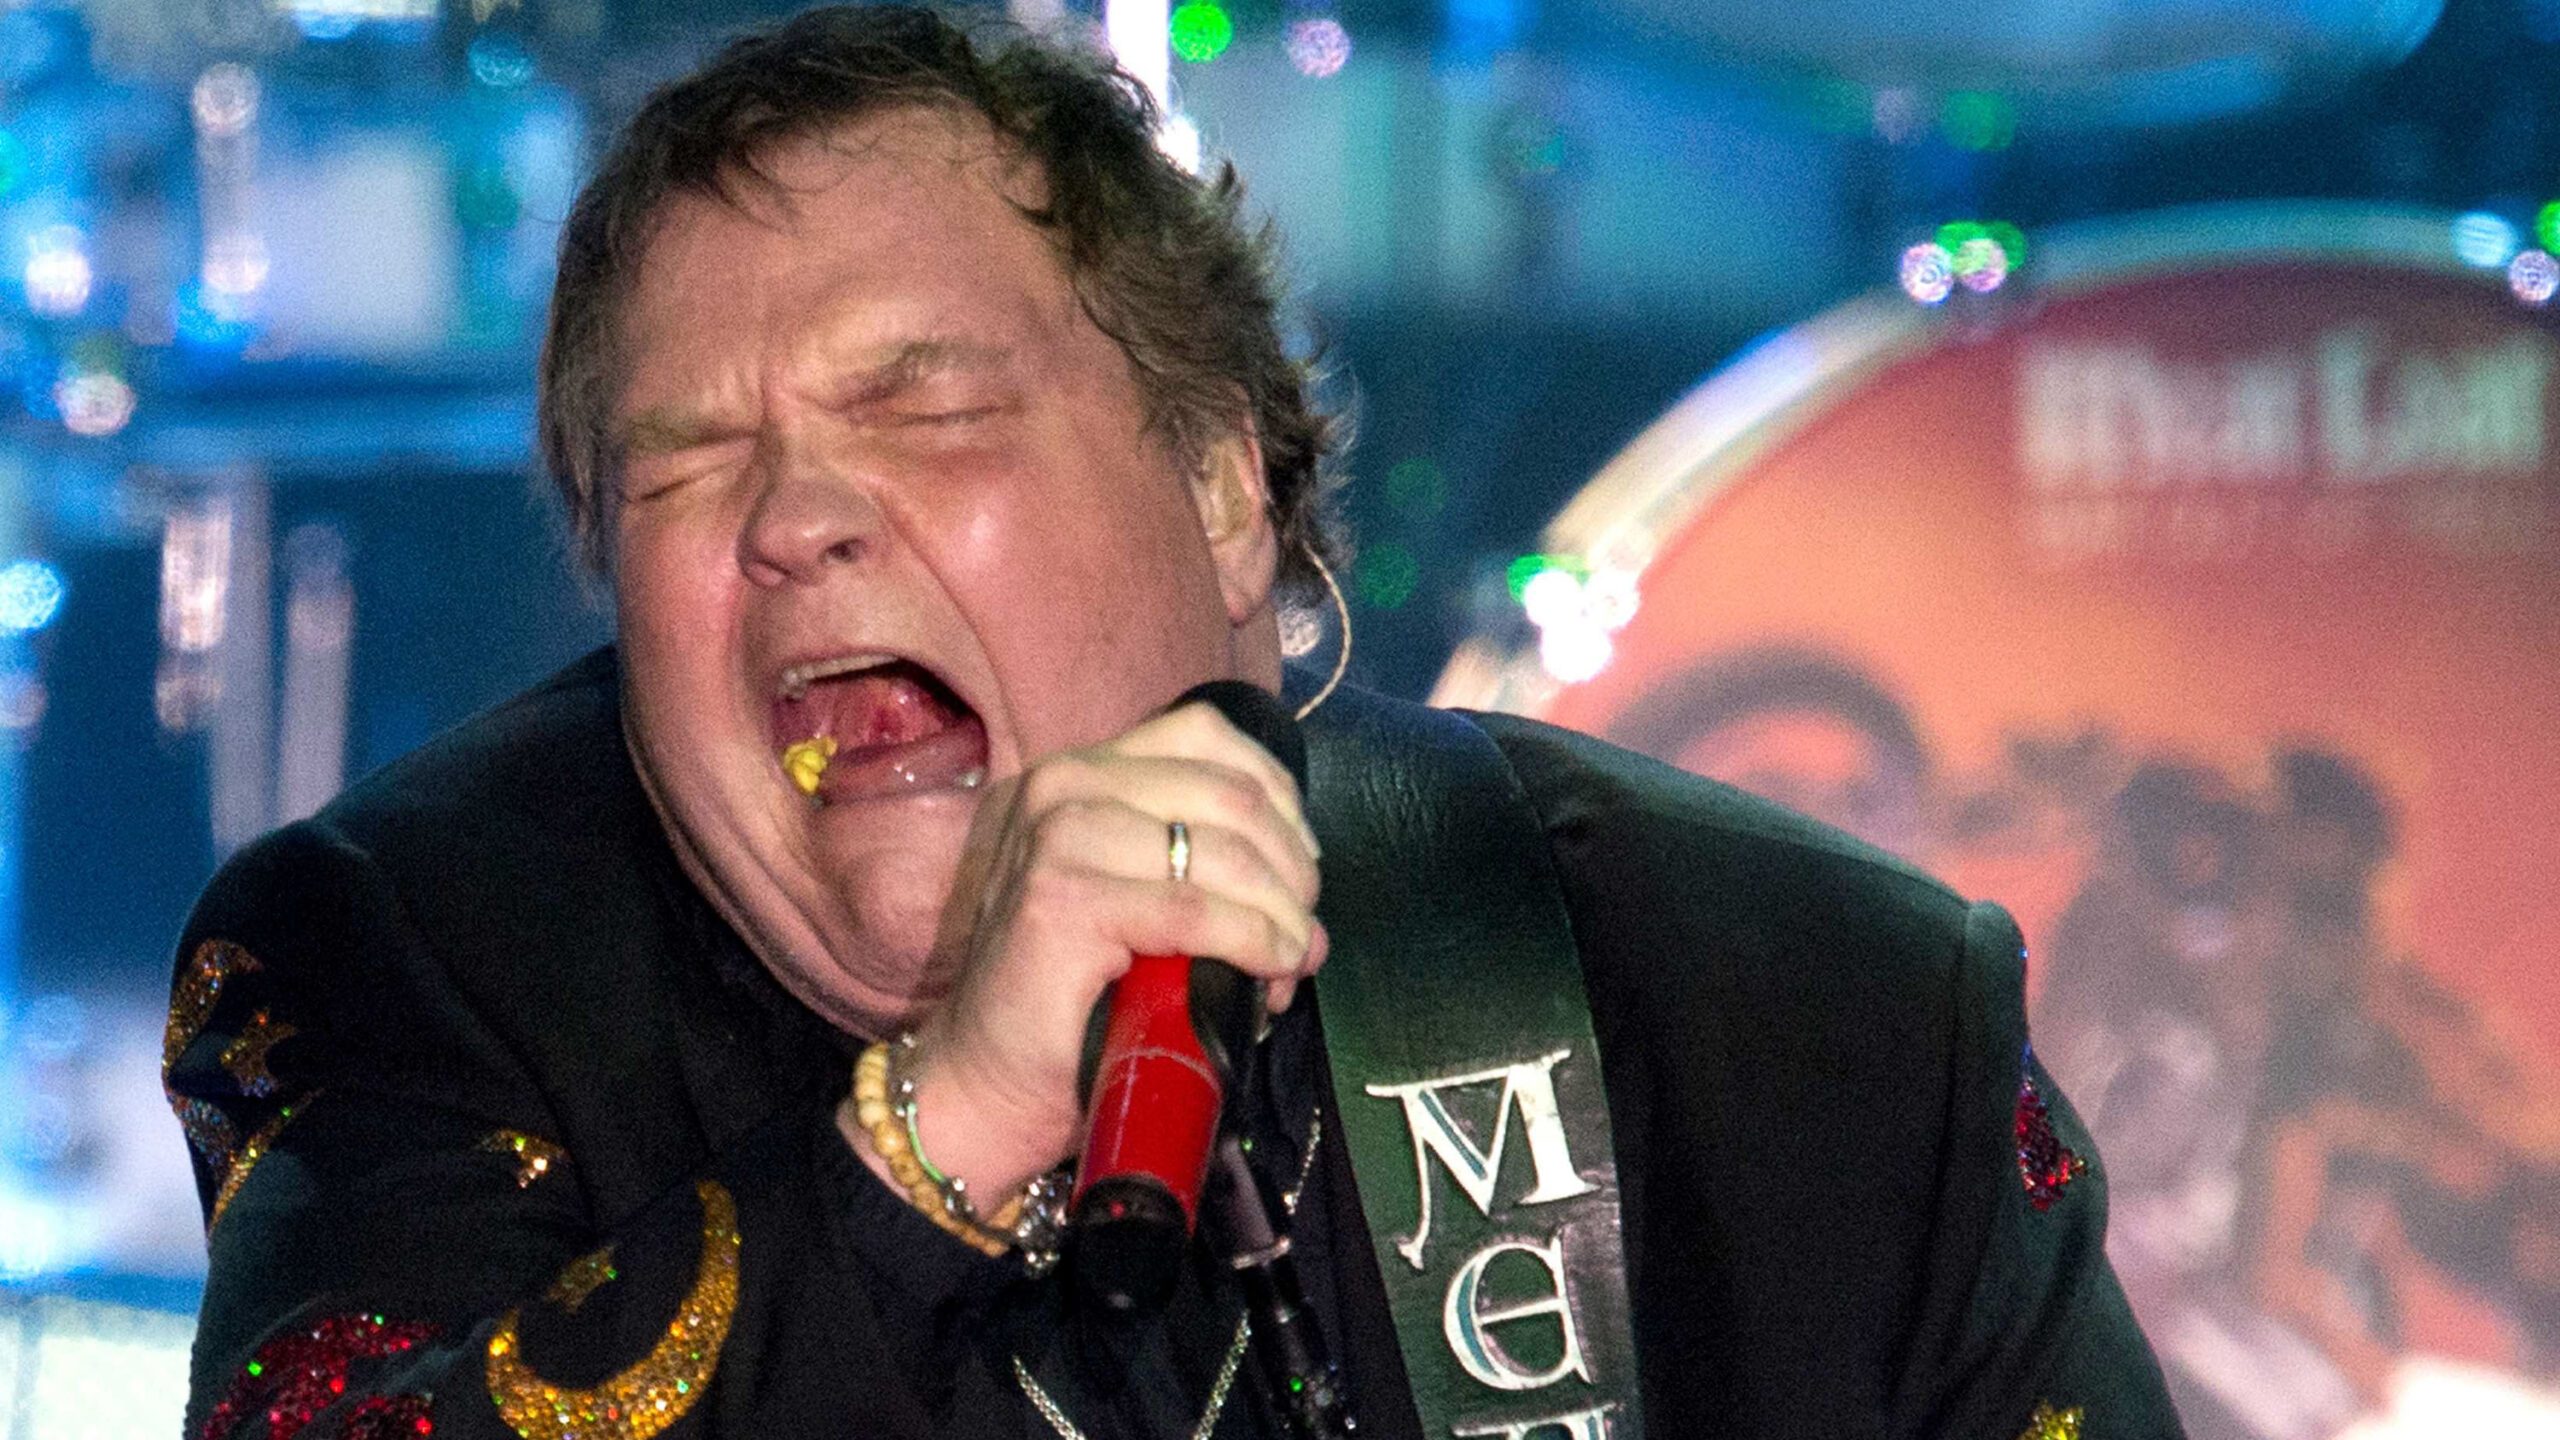 US rocker Meat Loaf ‘recovering well’ after collapse on stage in Canada